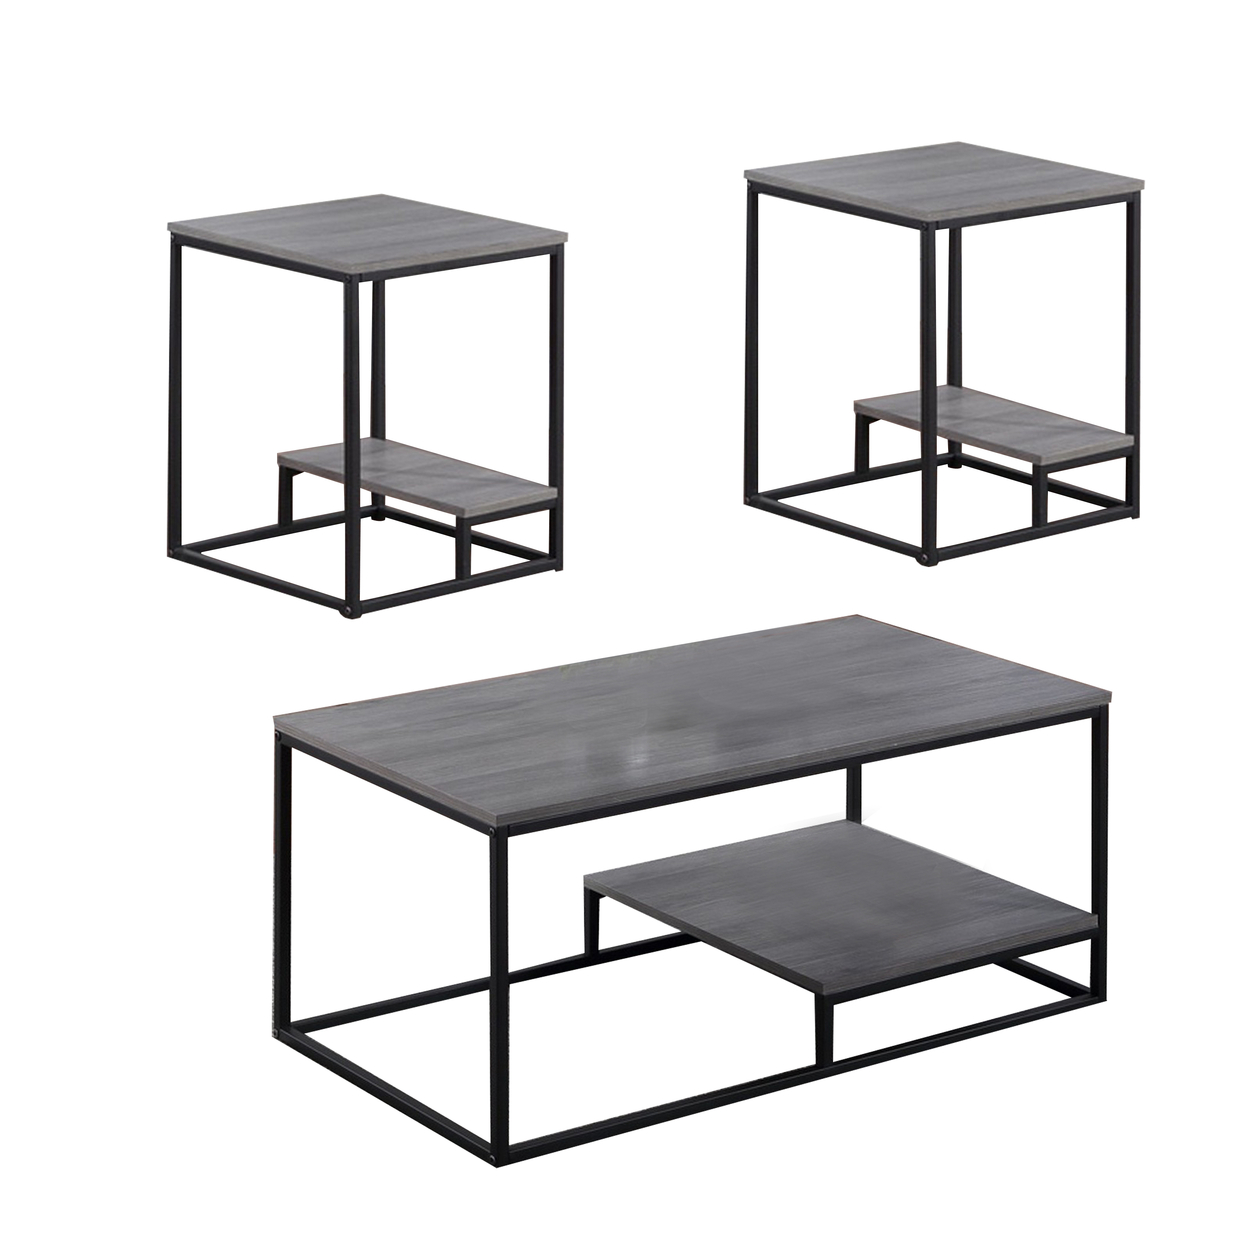 3 Piece Cocktail Set With Coffee Table And 2 End Tables, Wood Shelves, Gray- Saltoro Sherpi